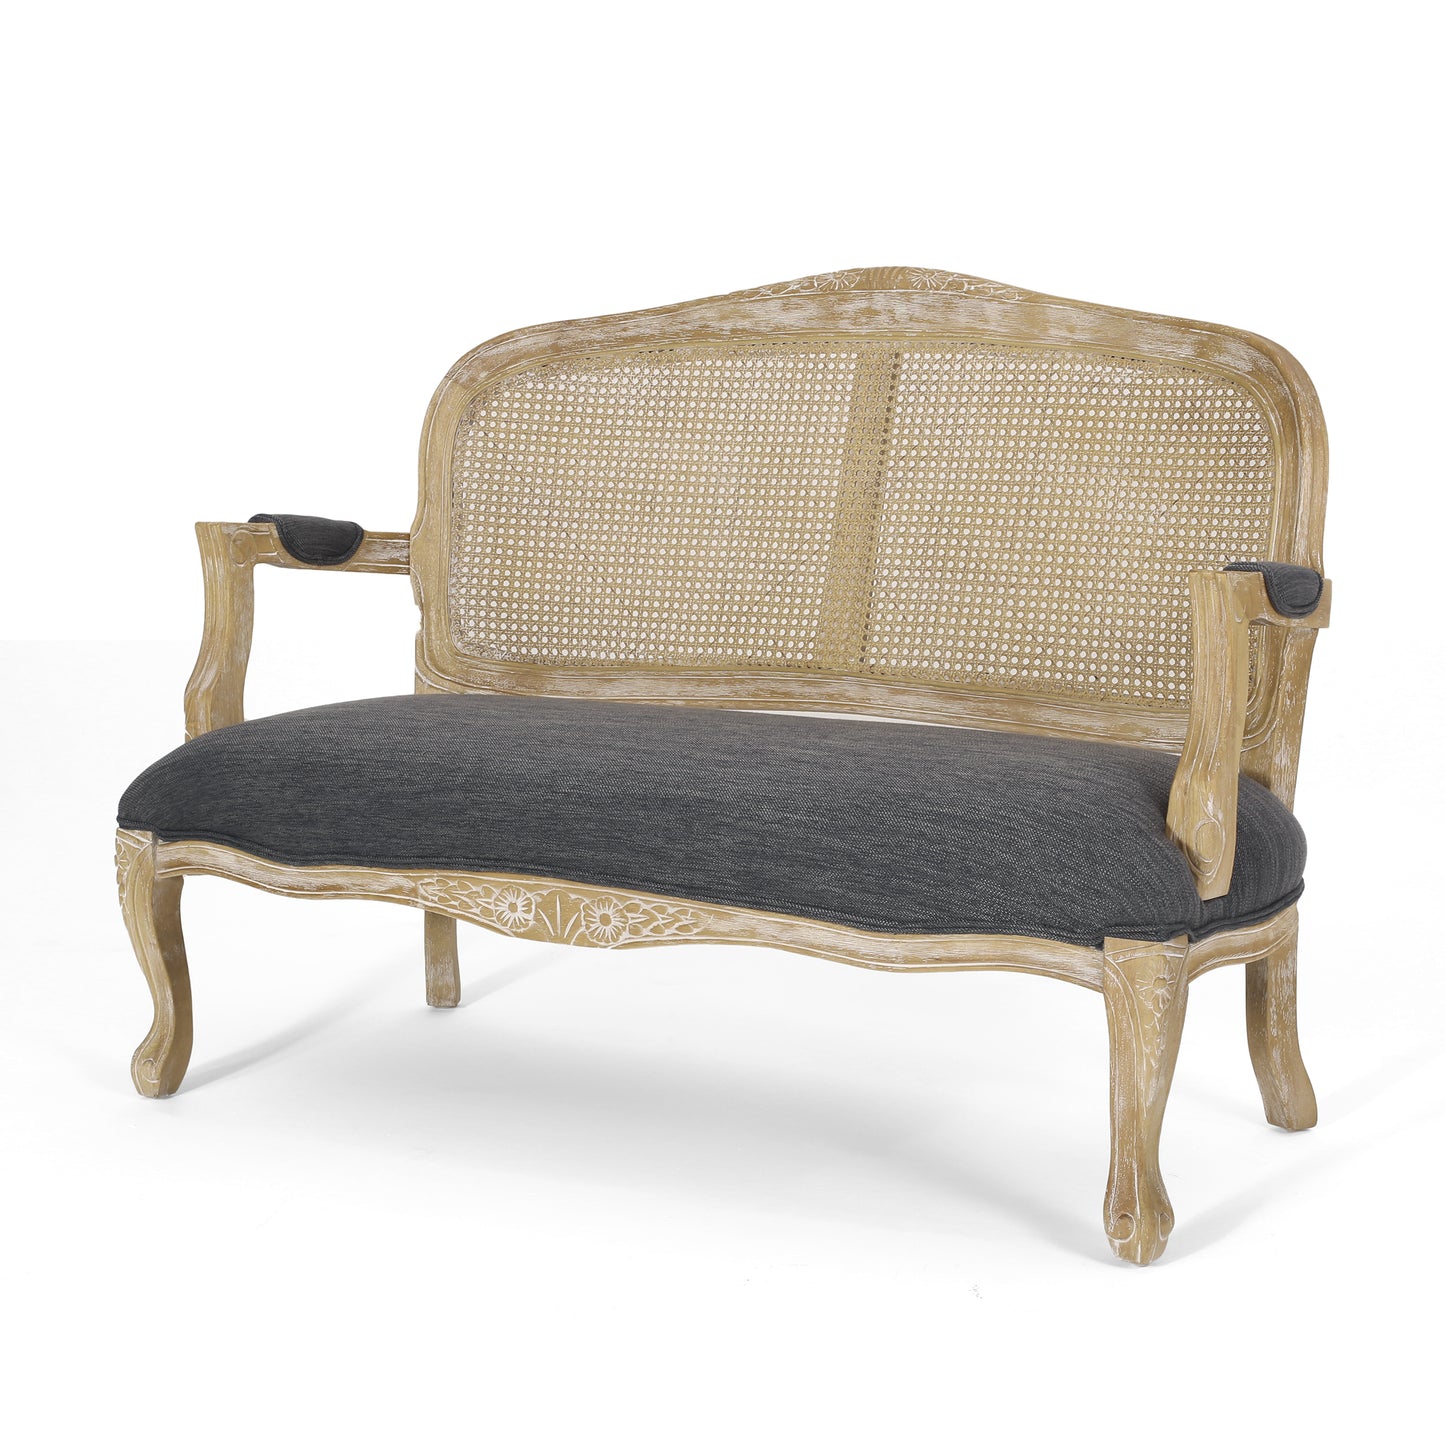 Wistar French Country Wood and Cane Loveseat